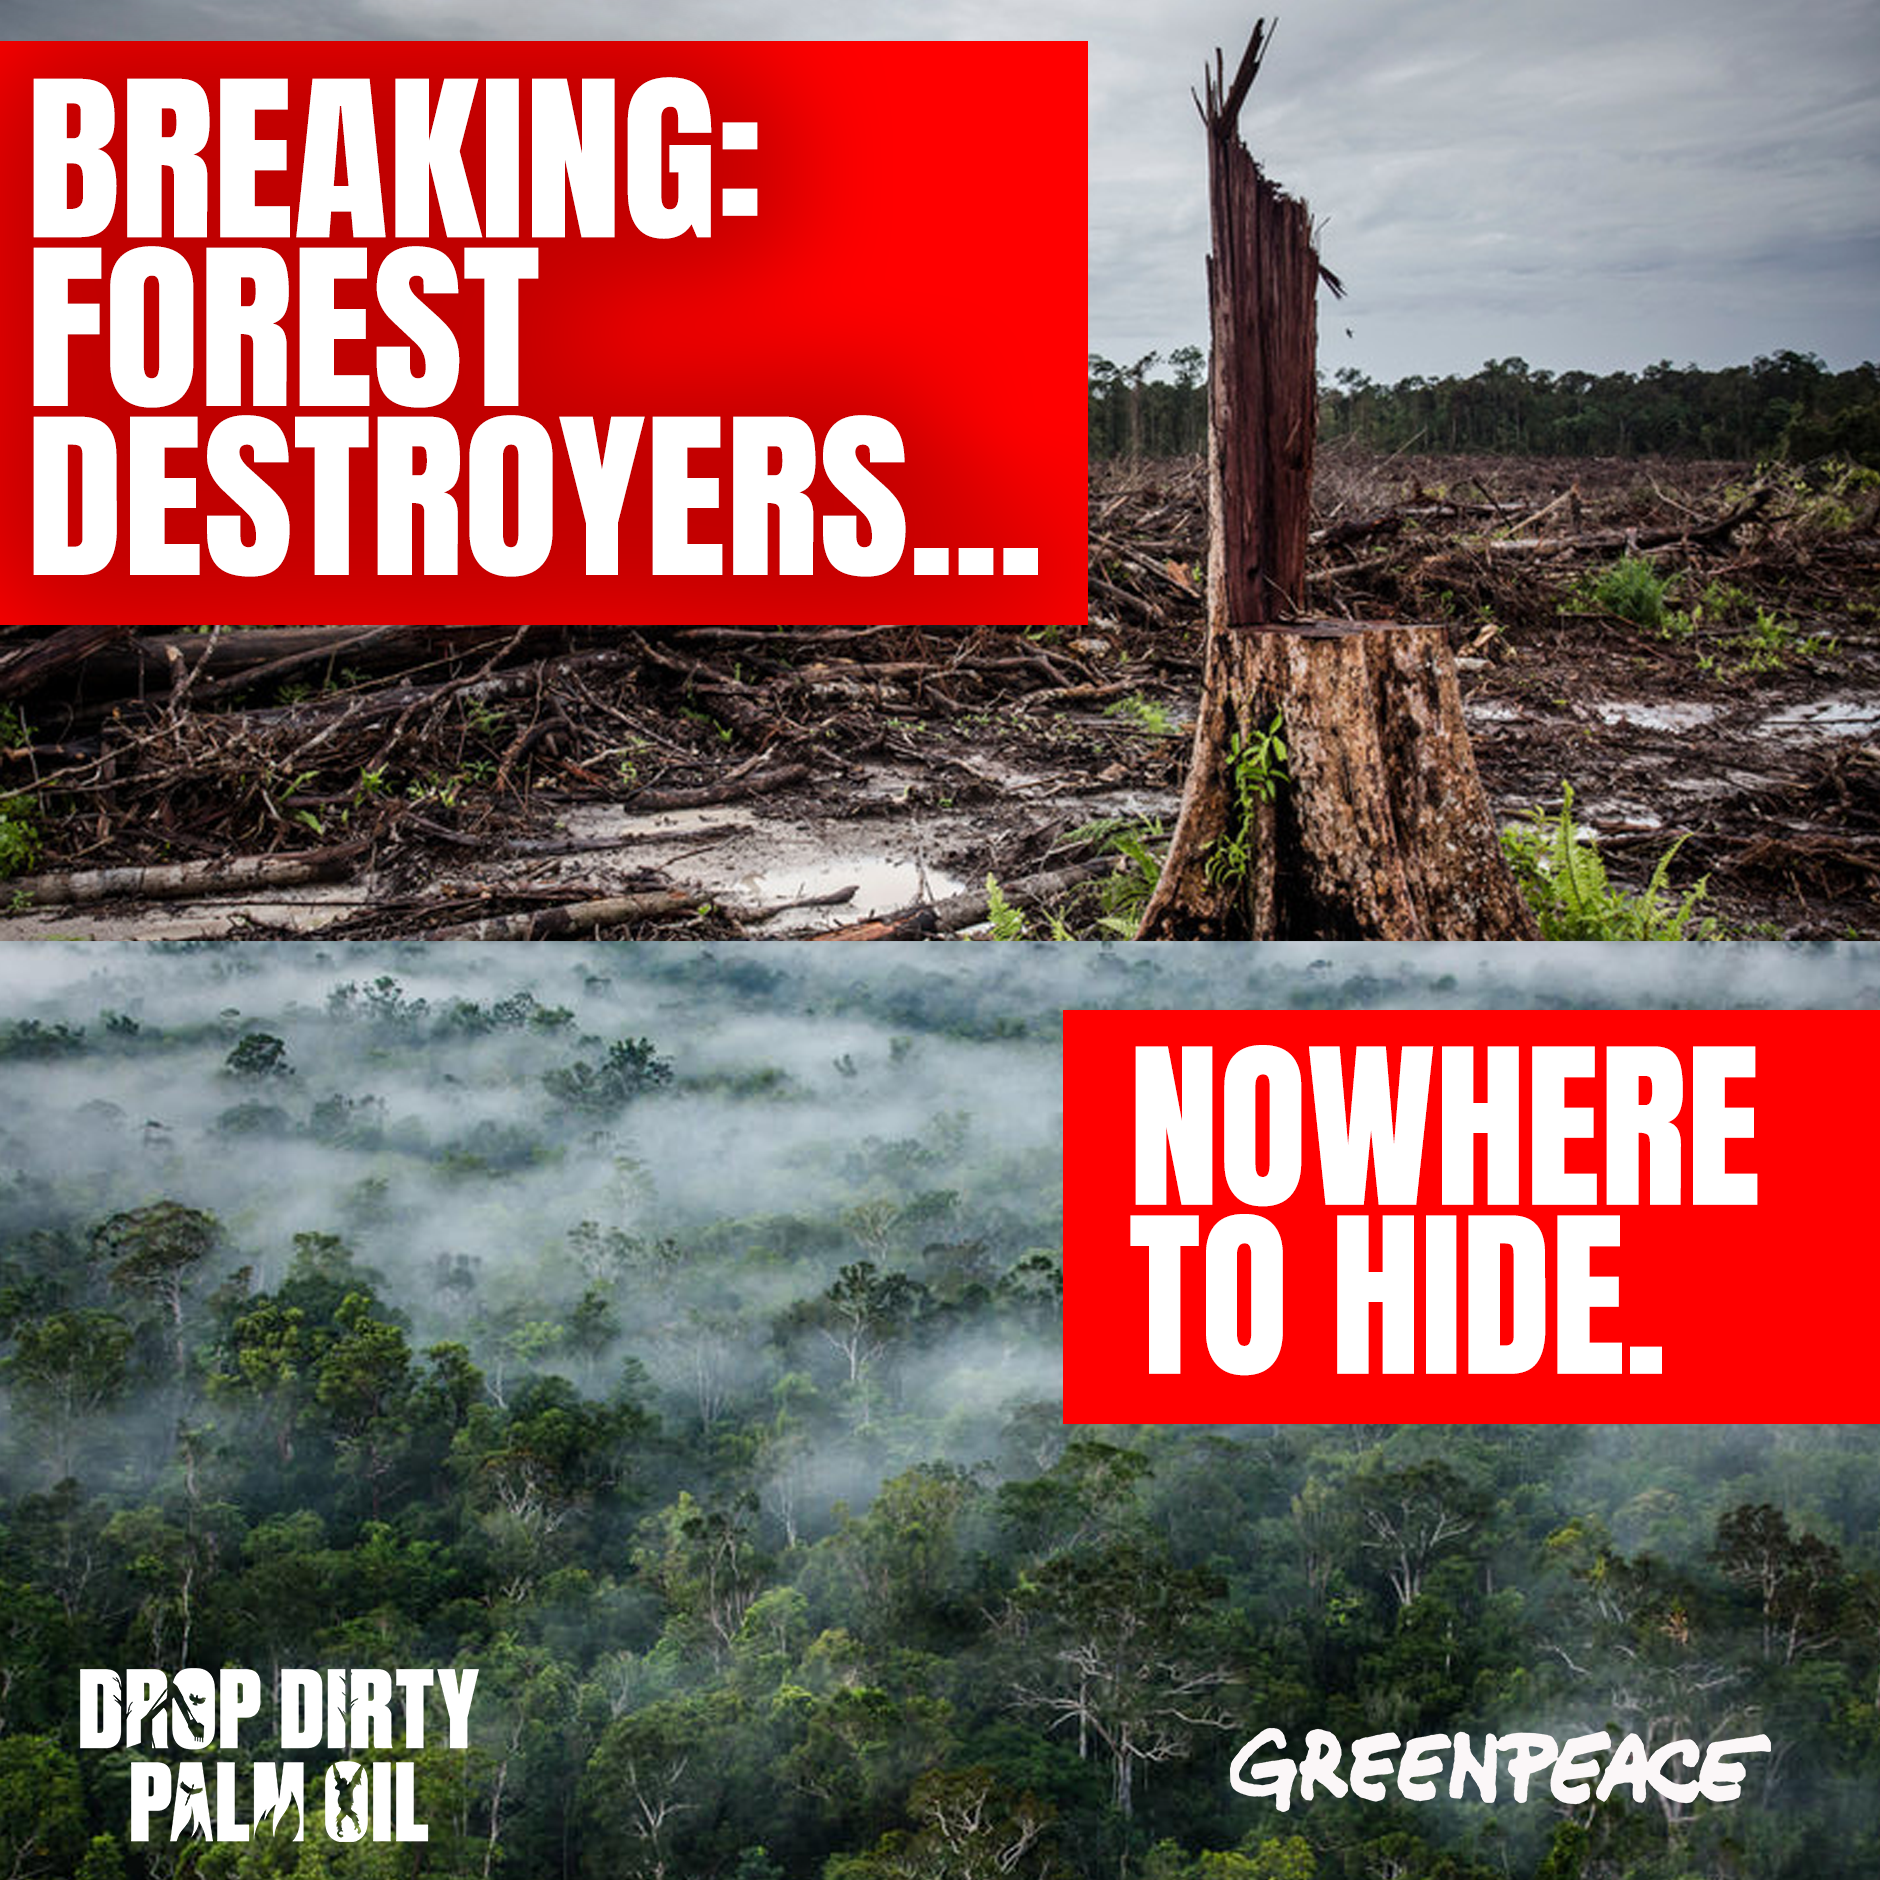 Forest-destroying palm oil companies nowhere to hide.